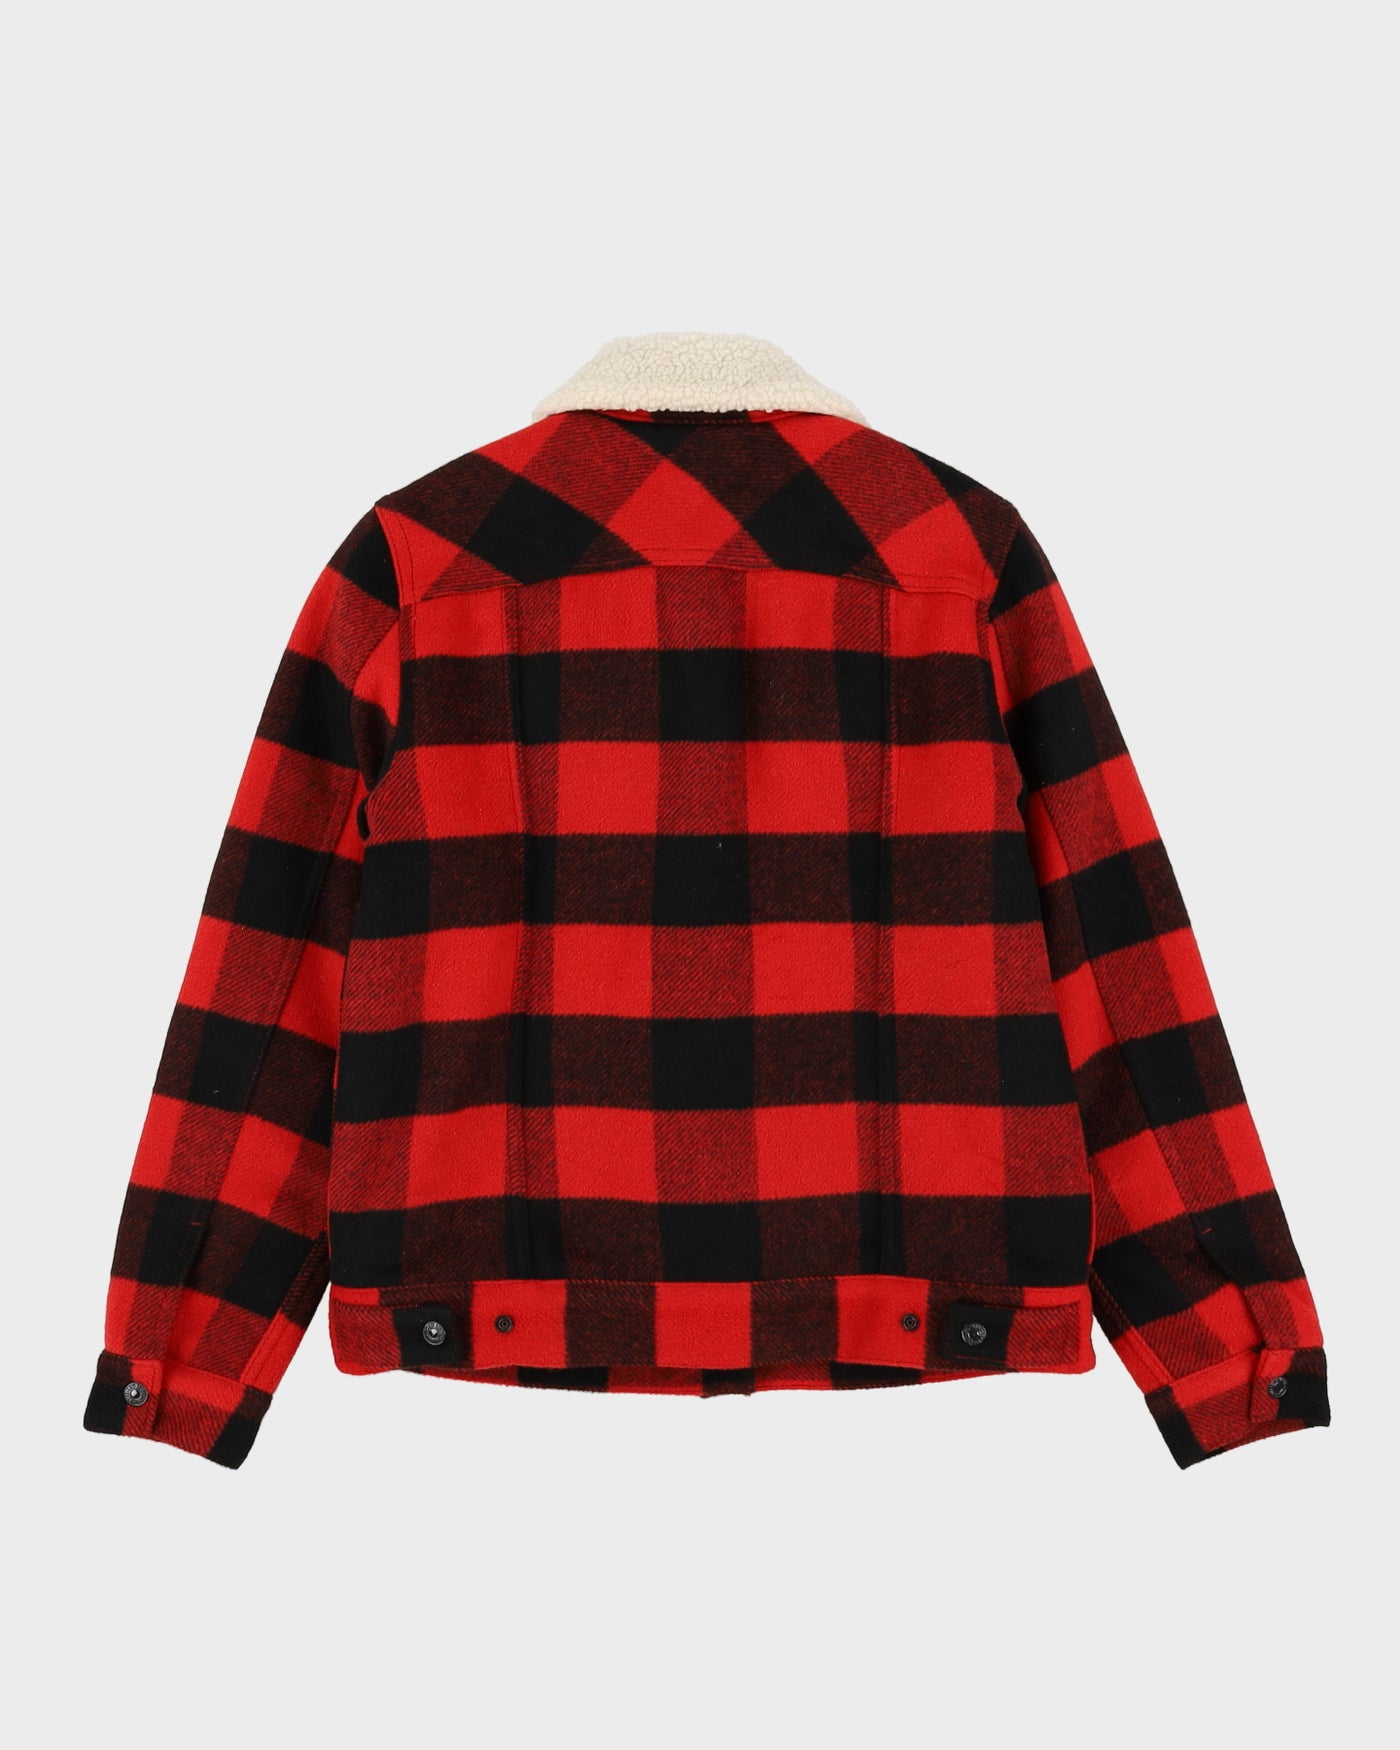 Levi's Red And Black Checked Sherpa Lined Jacket - XS